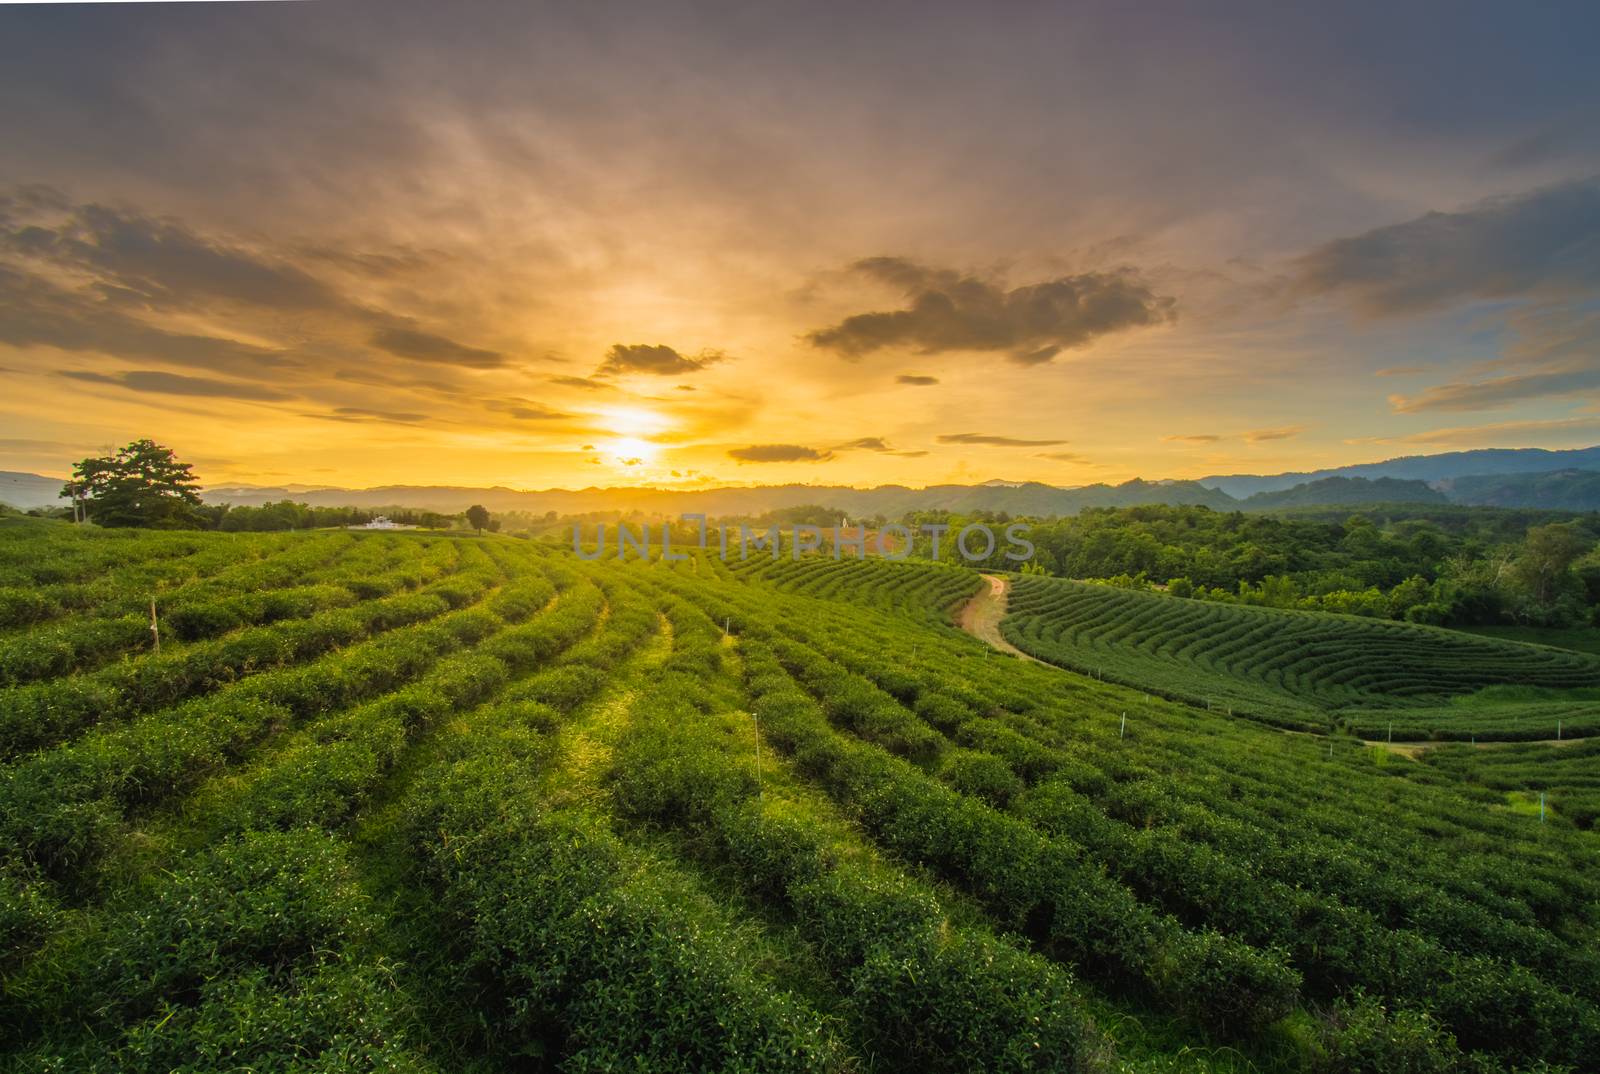 Beautiful sunsets at Chui Fong Tea Plantation   This is a popular tourist attraction in Chiang Rai. Beautiful sunset by anuraksir